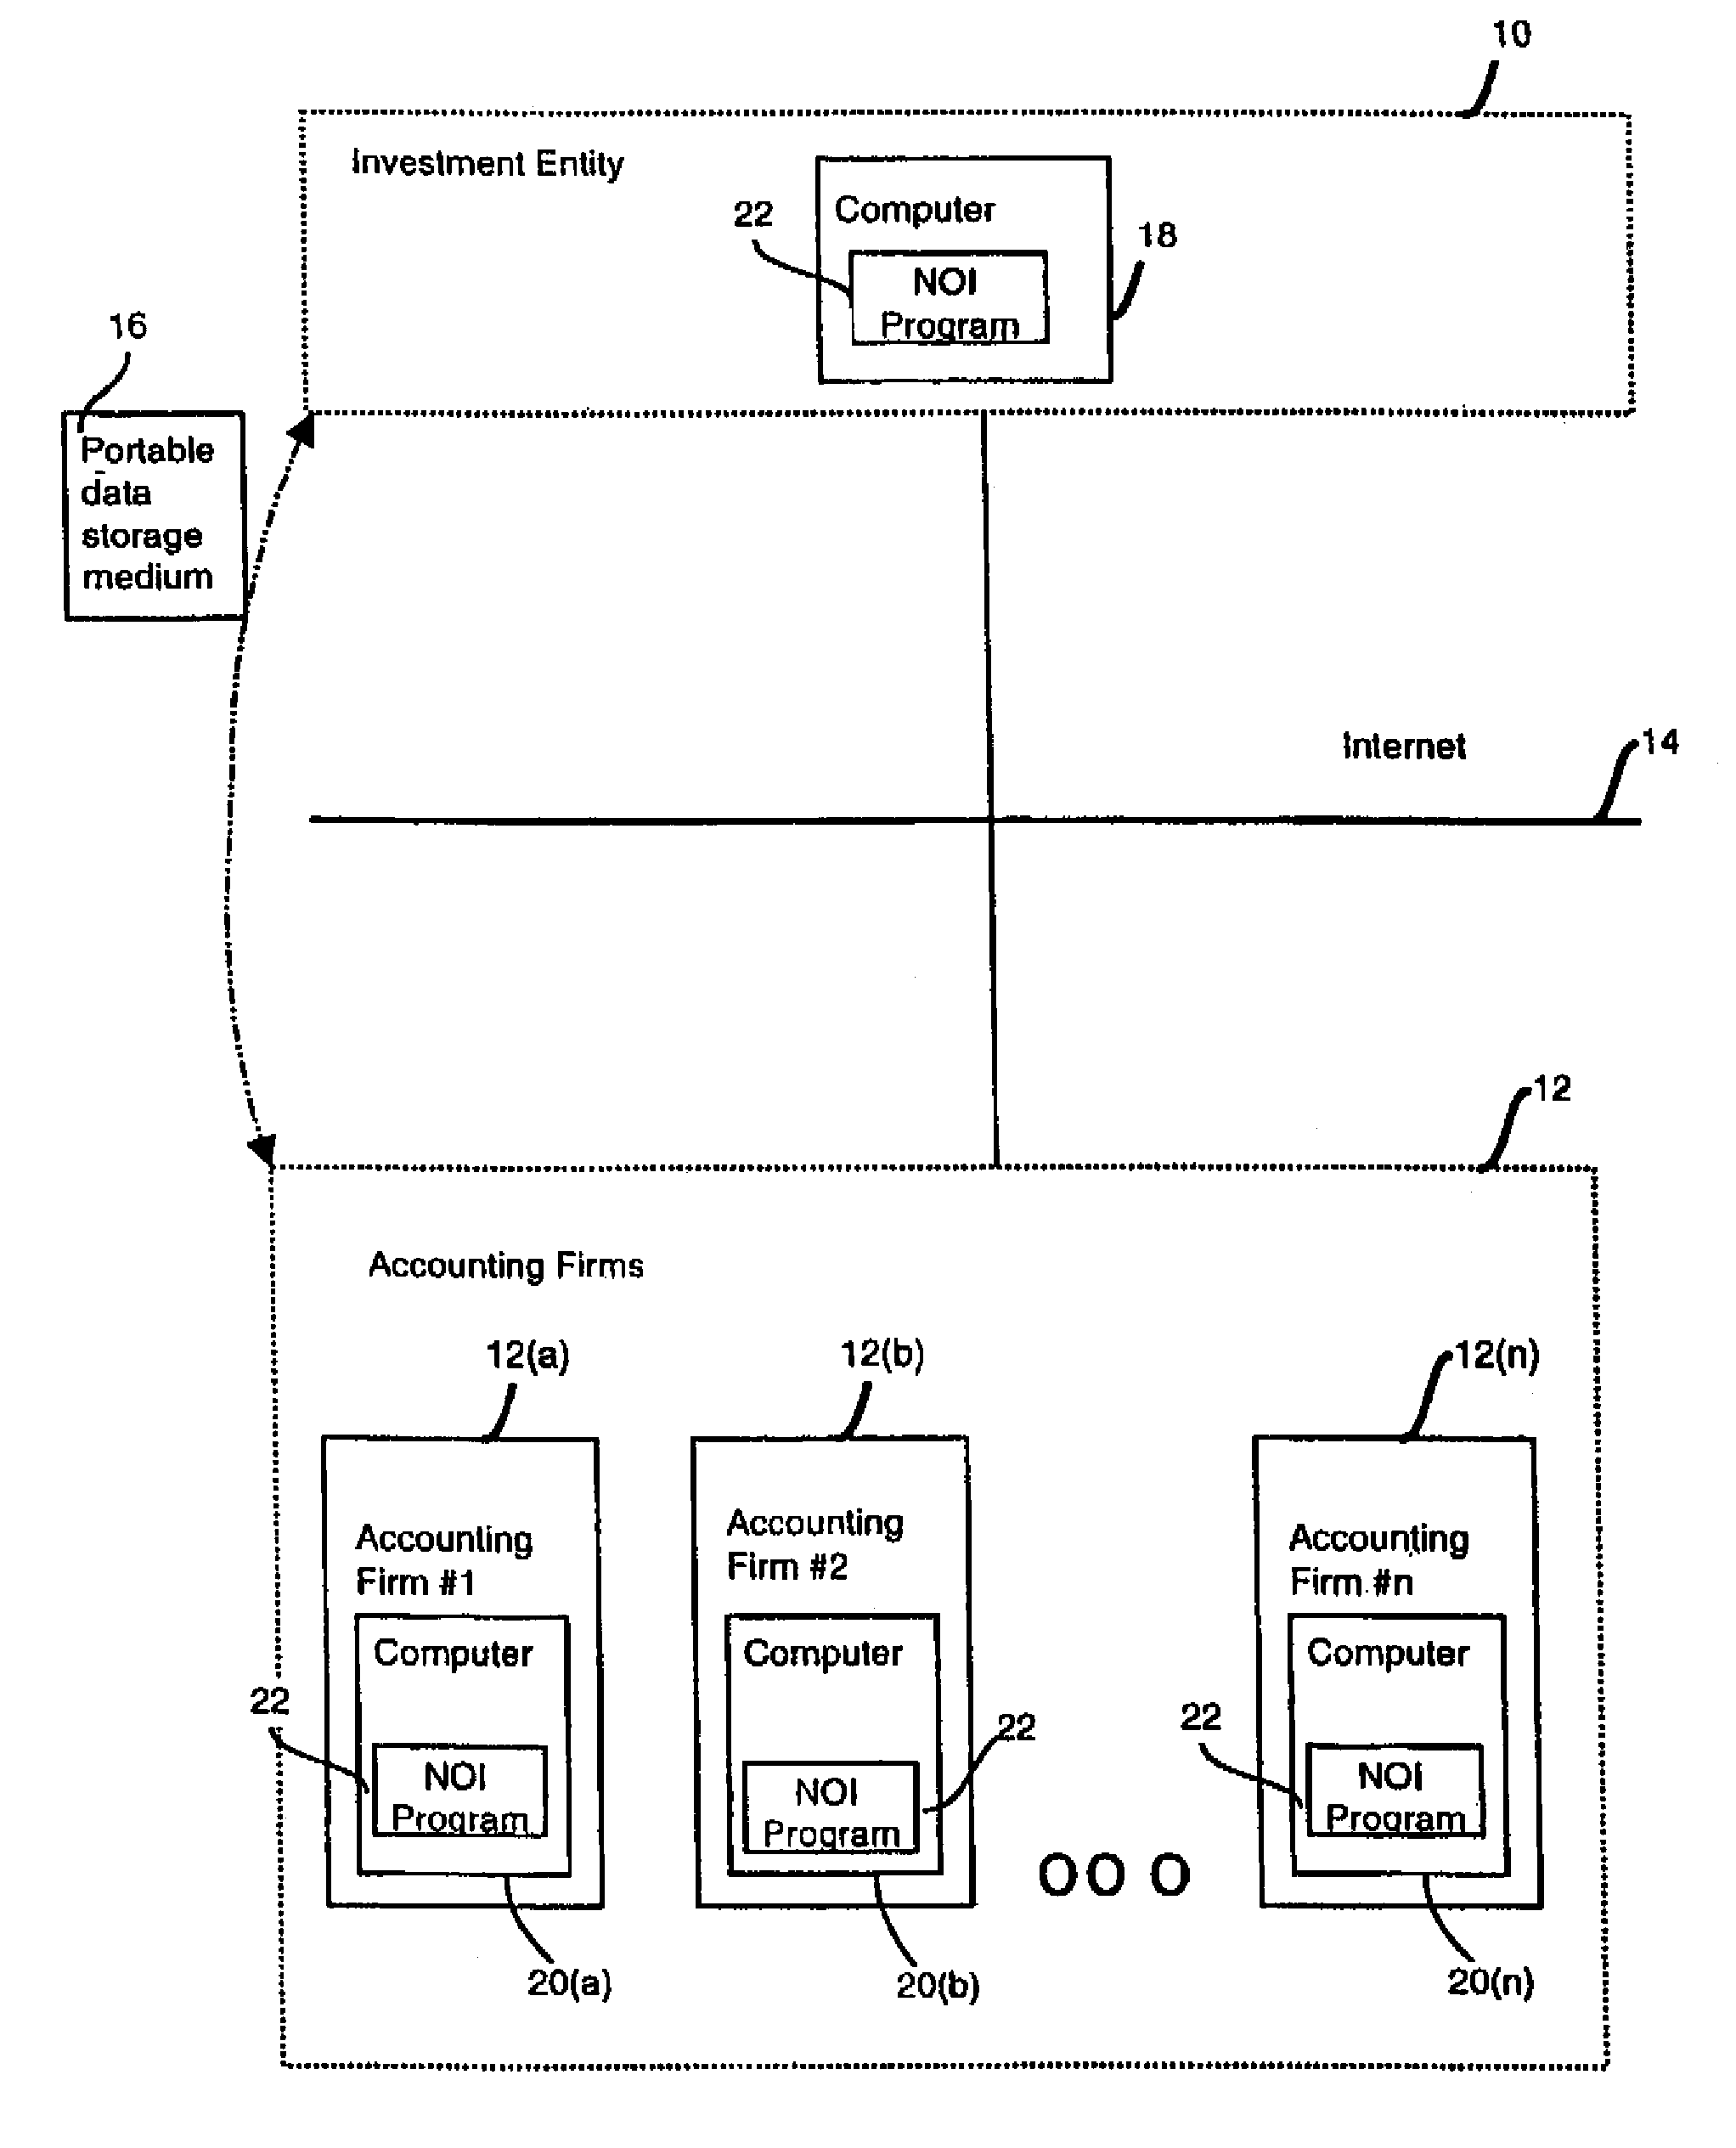 Method and product for calculating a net operating income audit and for enabling substantially identical audit practices among a plurality of audit firms